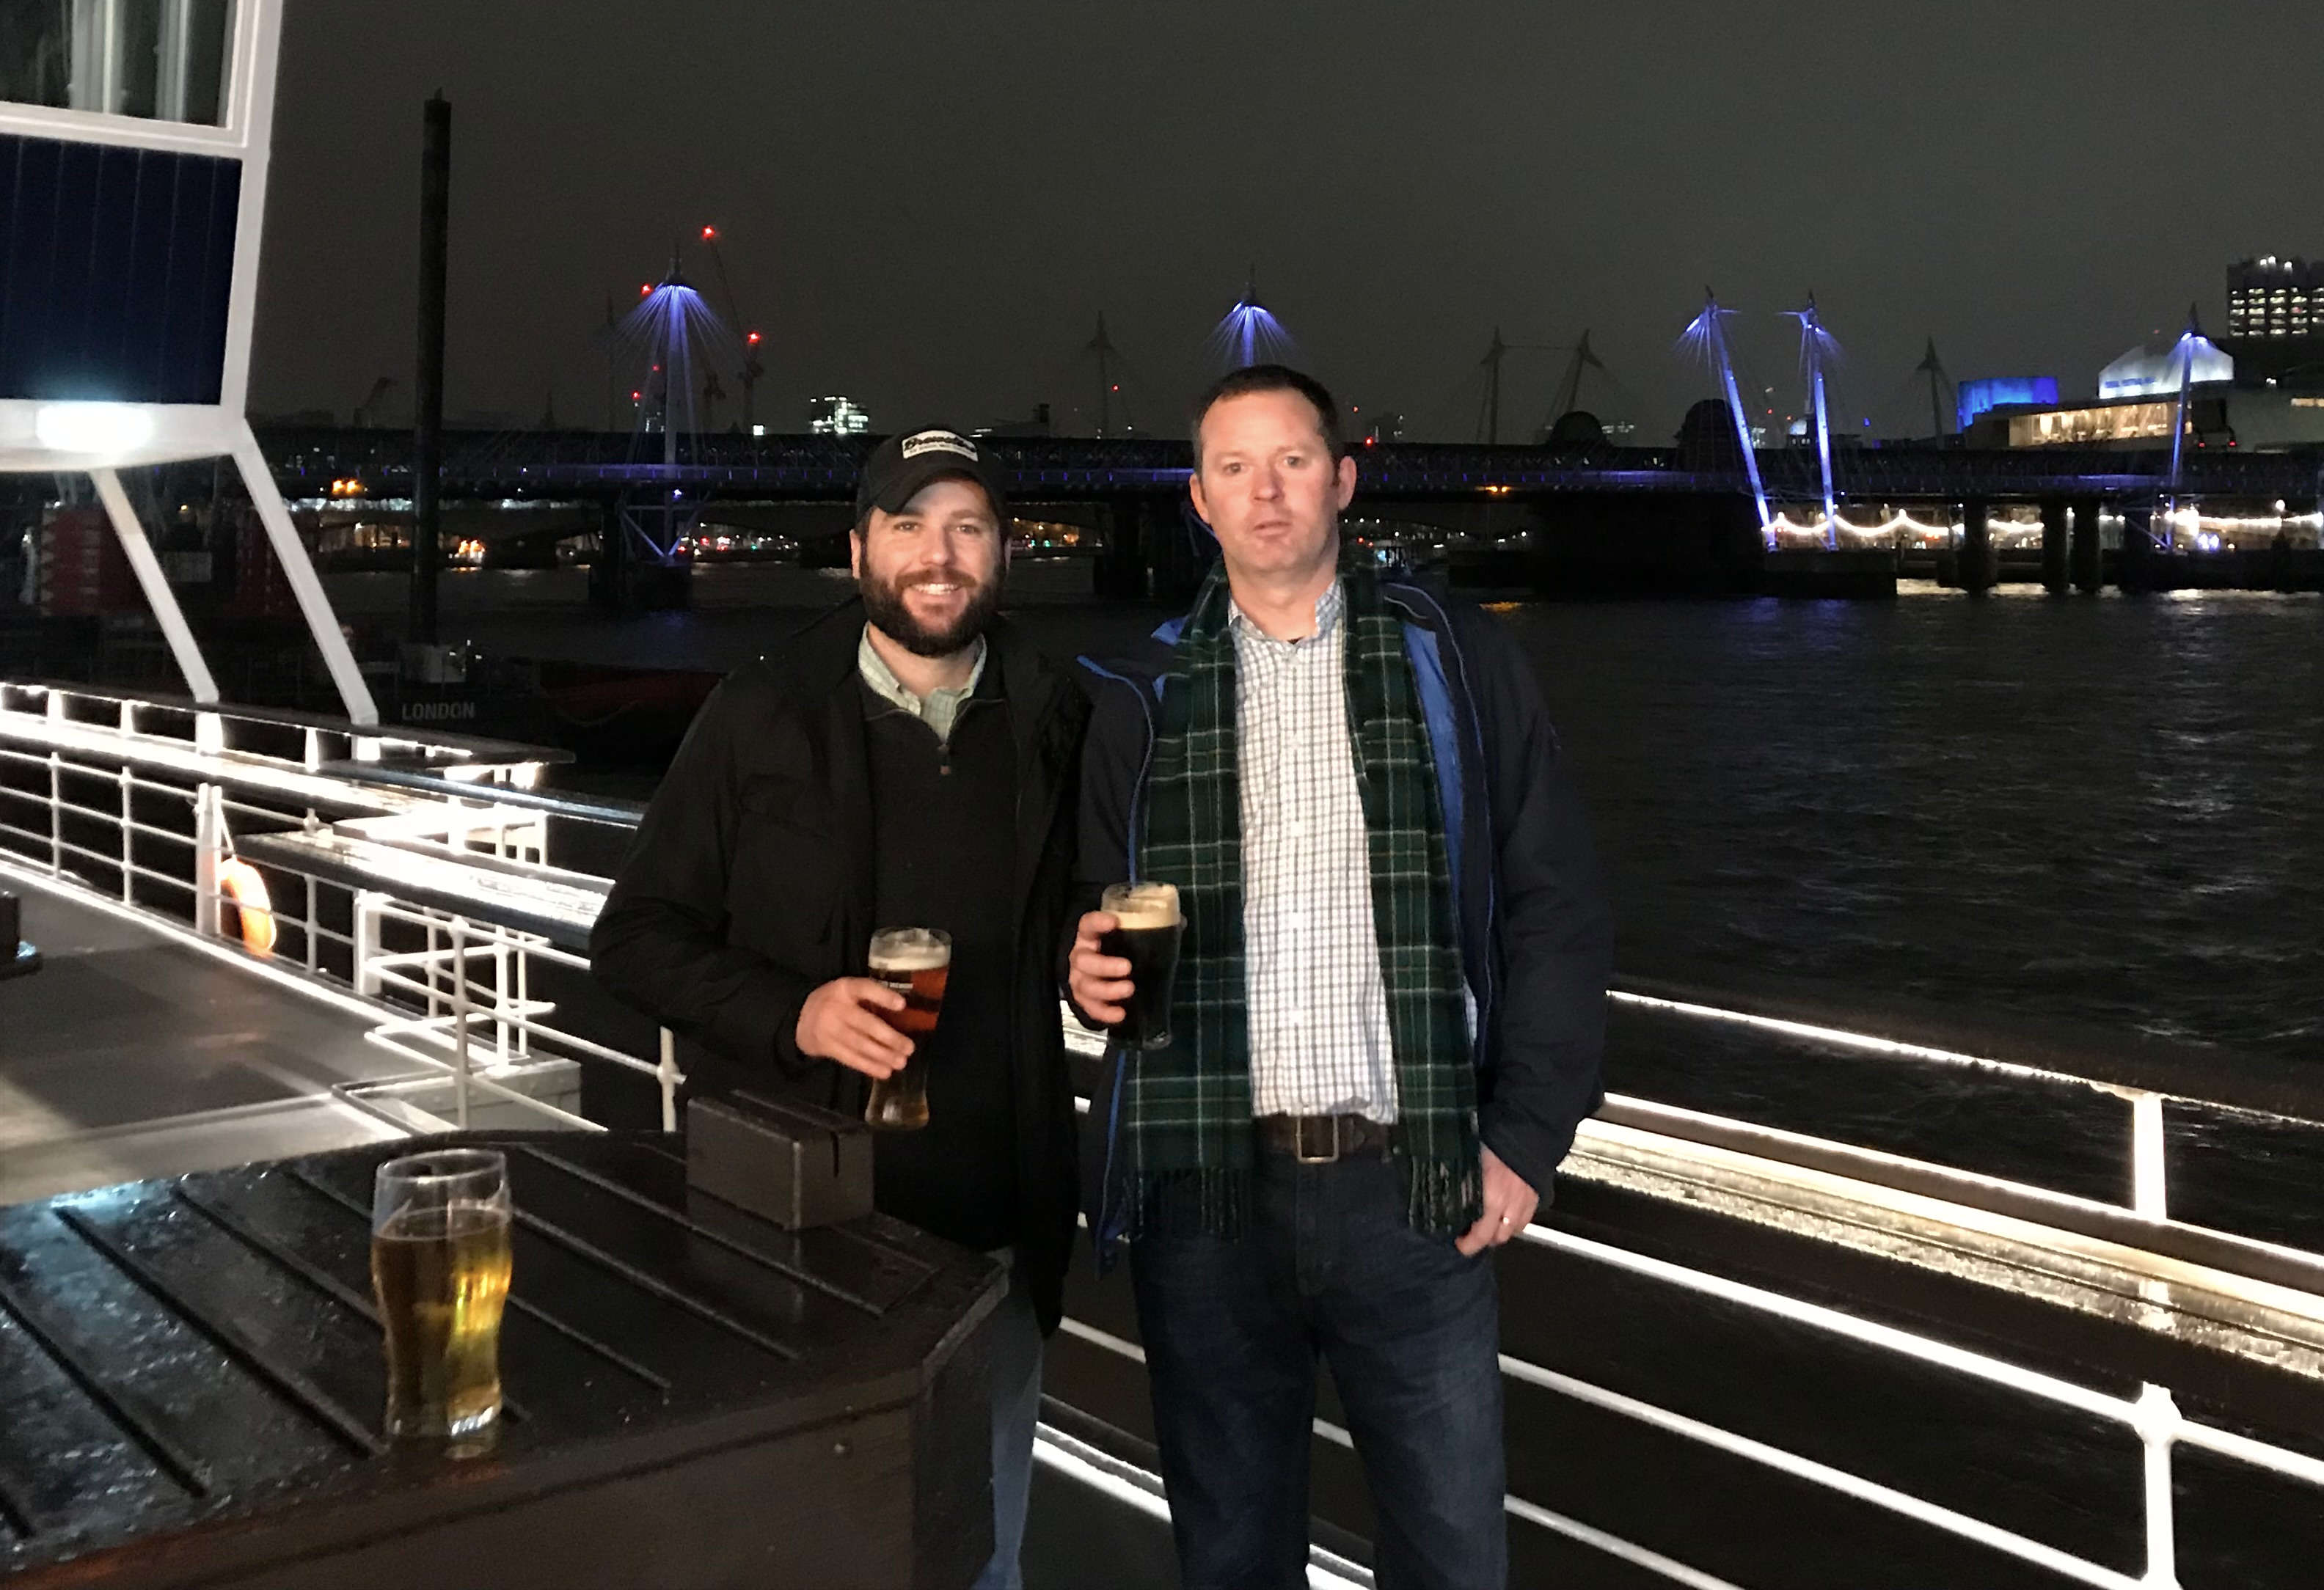 Jeff Coyle and Kevin Coyle drinking beer on a boat in London.